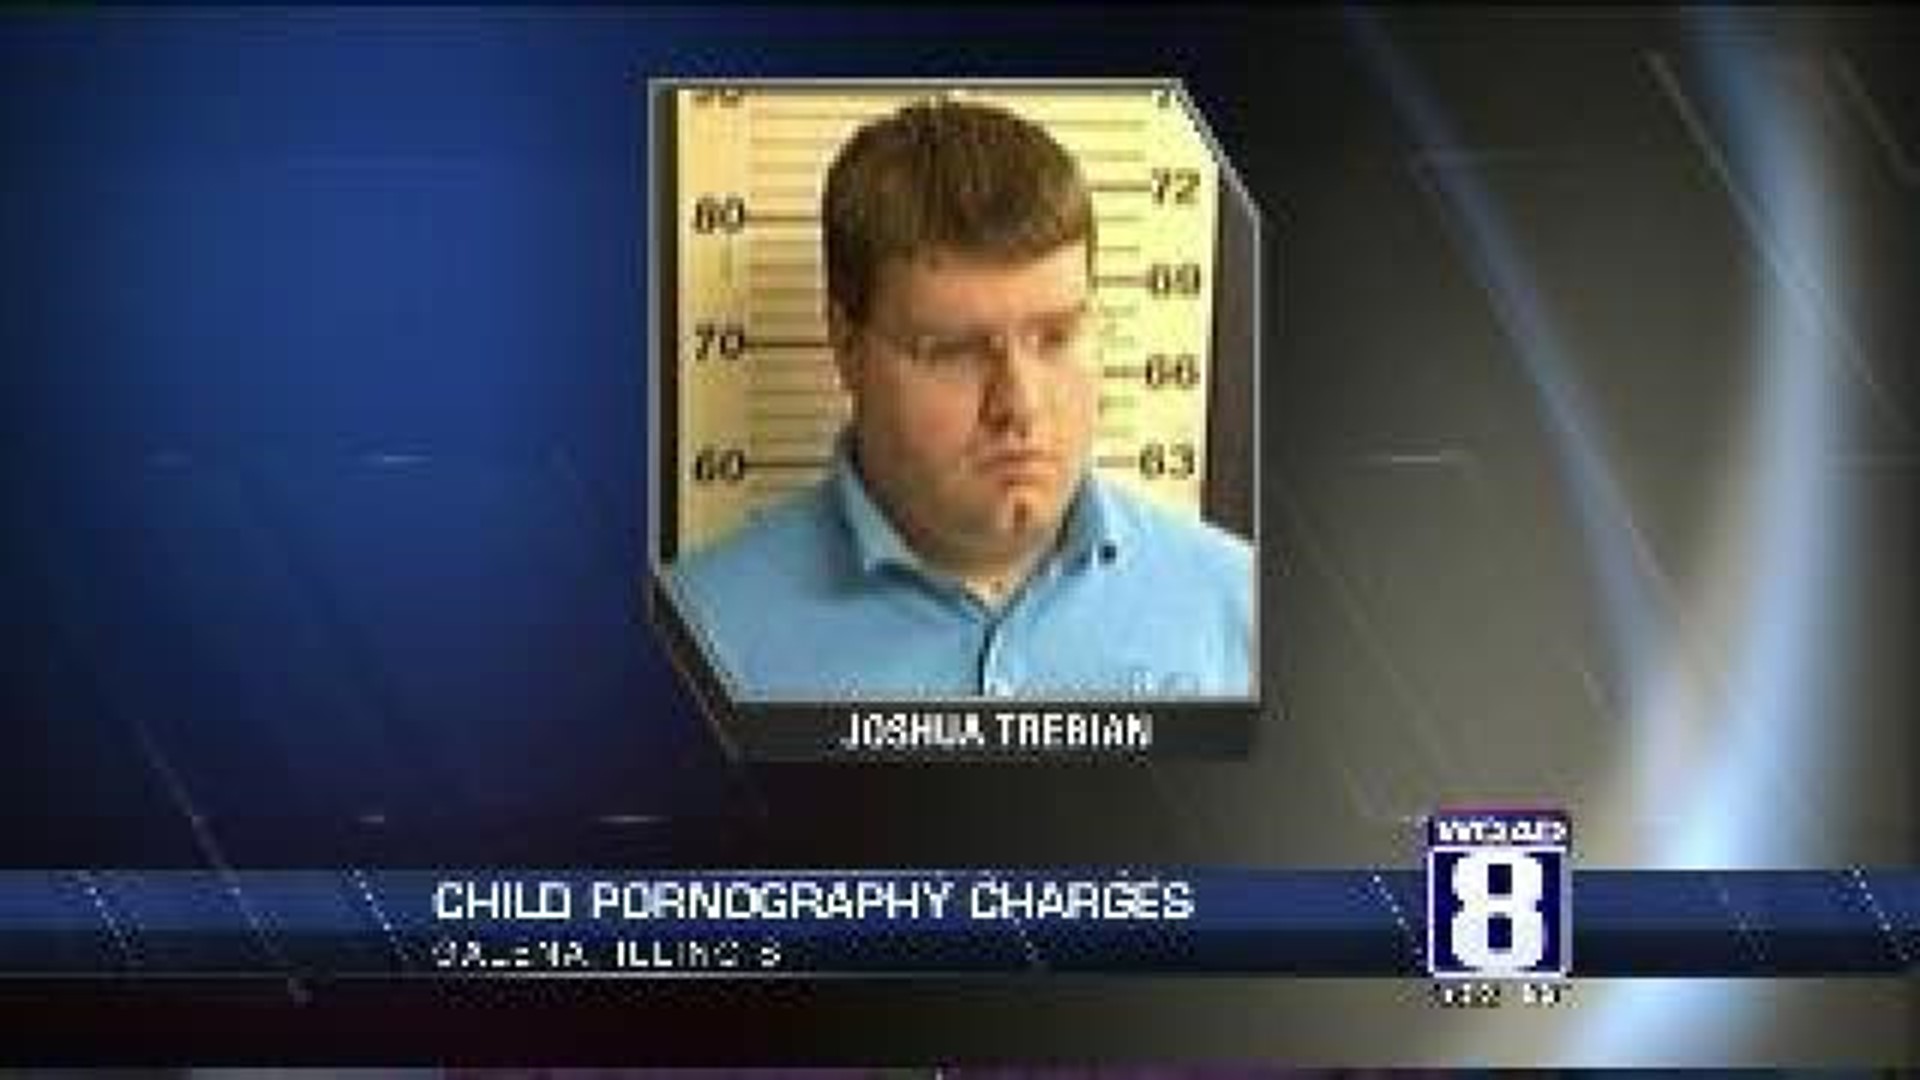 Man faces child pornography charges